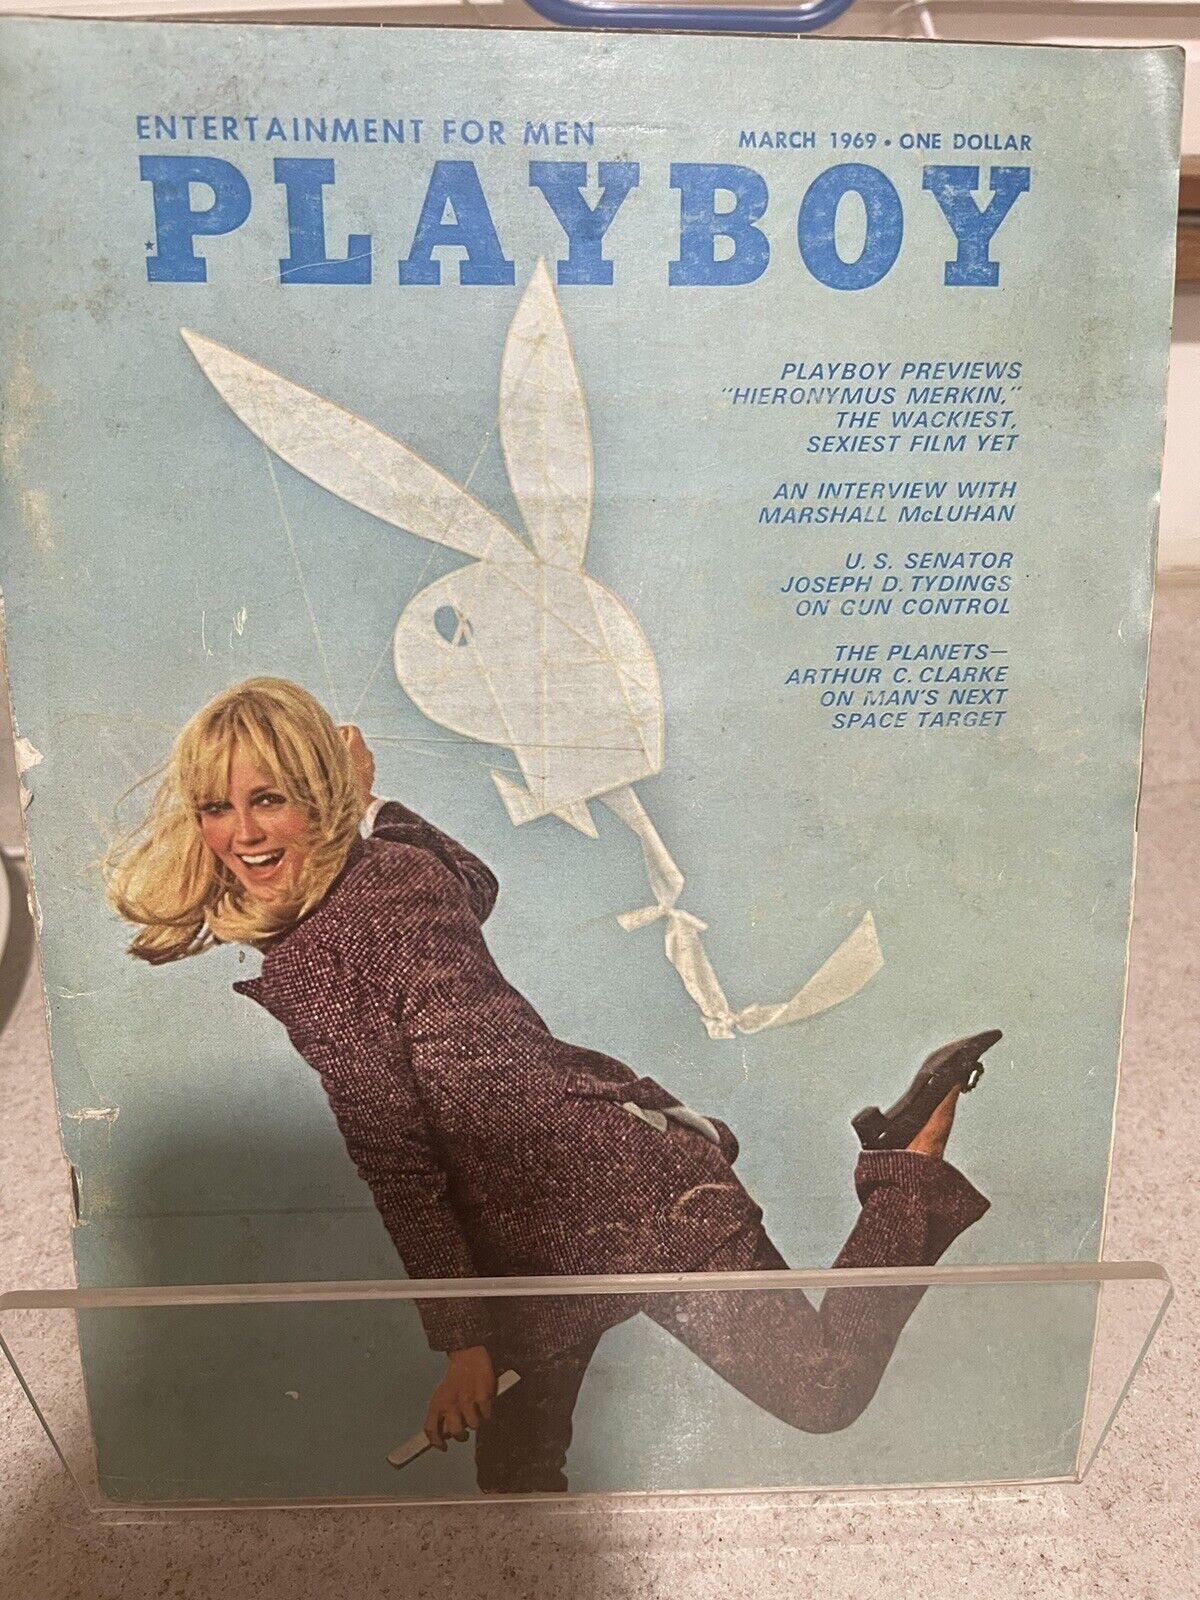 PLAYBOY MAGAZINE MARCH 1969 - CENTERFOLD INTACT